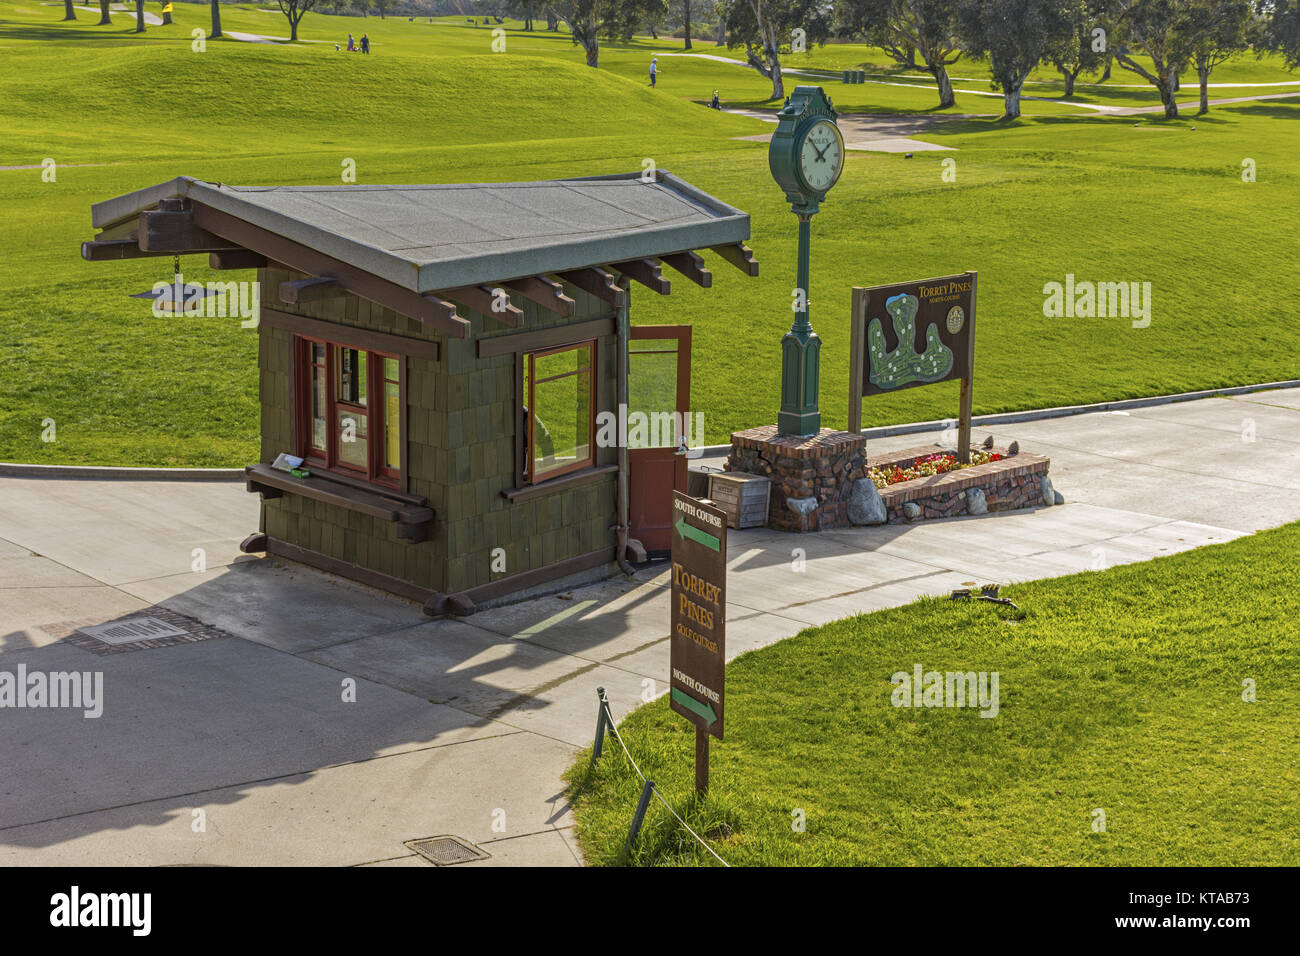 LA JOLLA, CALIFORNIA, USA - NOVEMBER 6, 2017: The starters shack on the first tee of Torrey Pines golf course near San Diego. Stock Photo